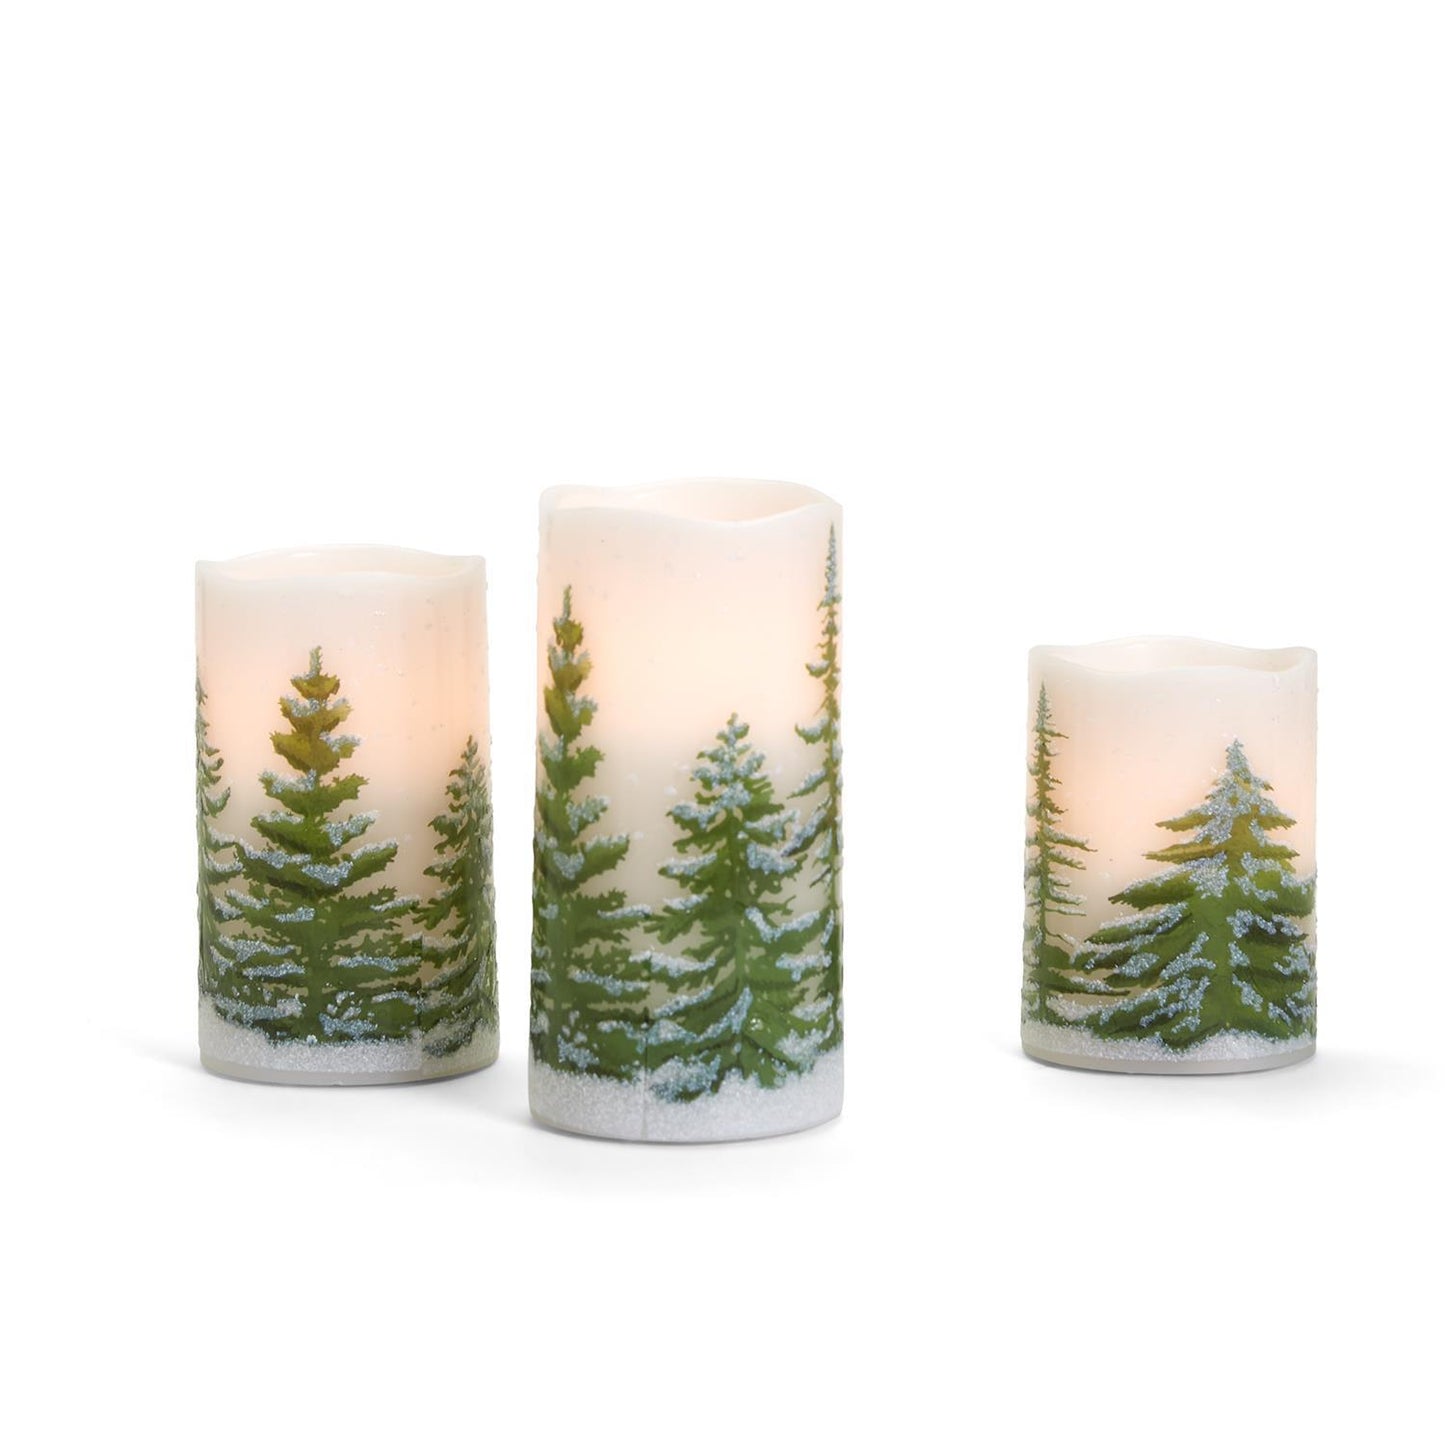 Evergreens Flameless Flickering LED Decorative Pillar Candles In Assorted Sizes